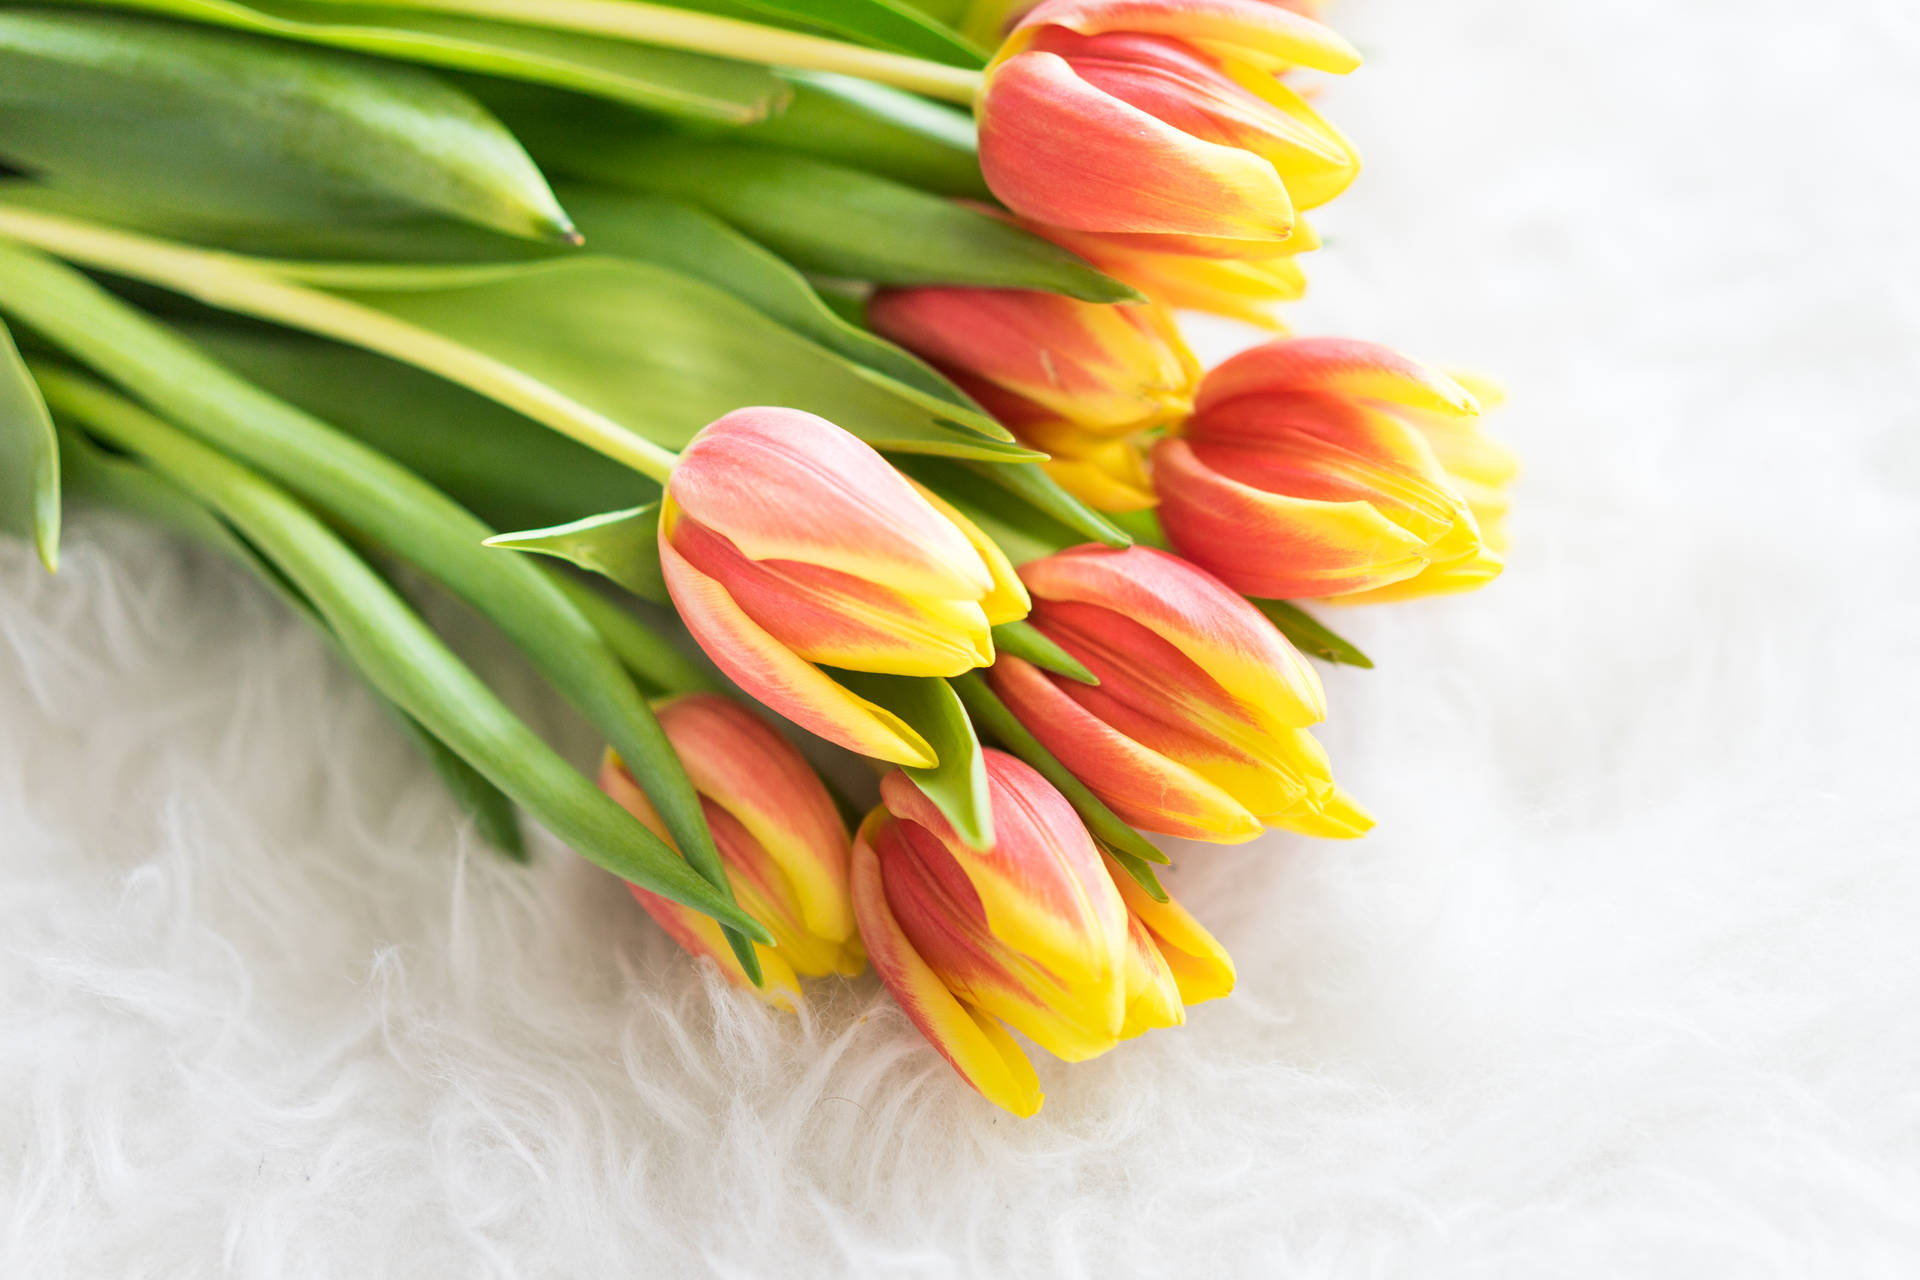 Romantic Love Flowers Pink And Yellow Tulips Background